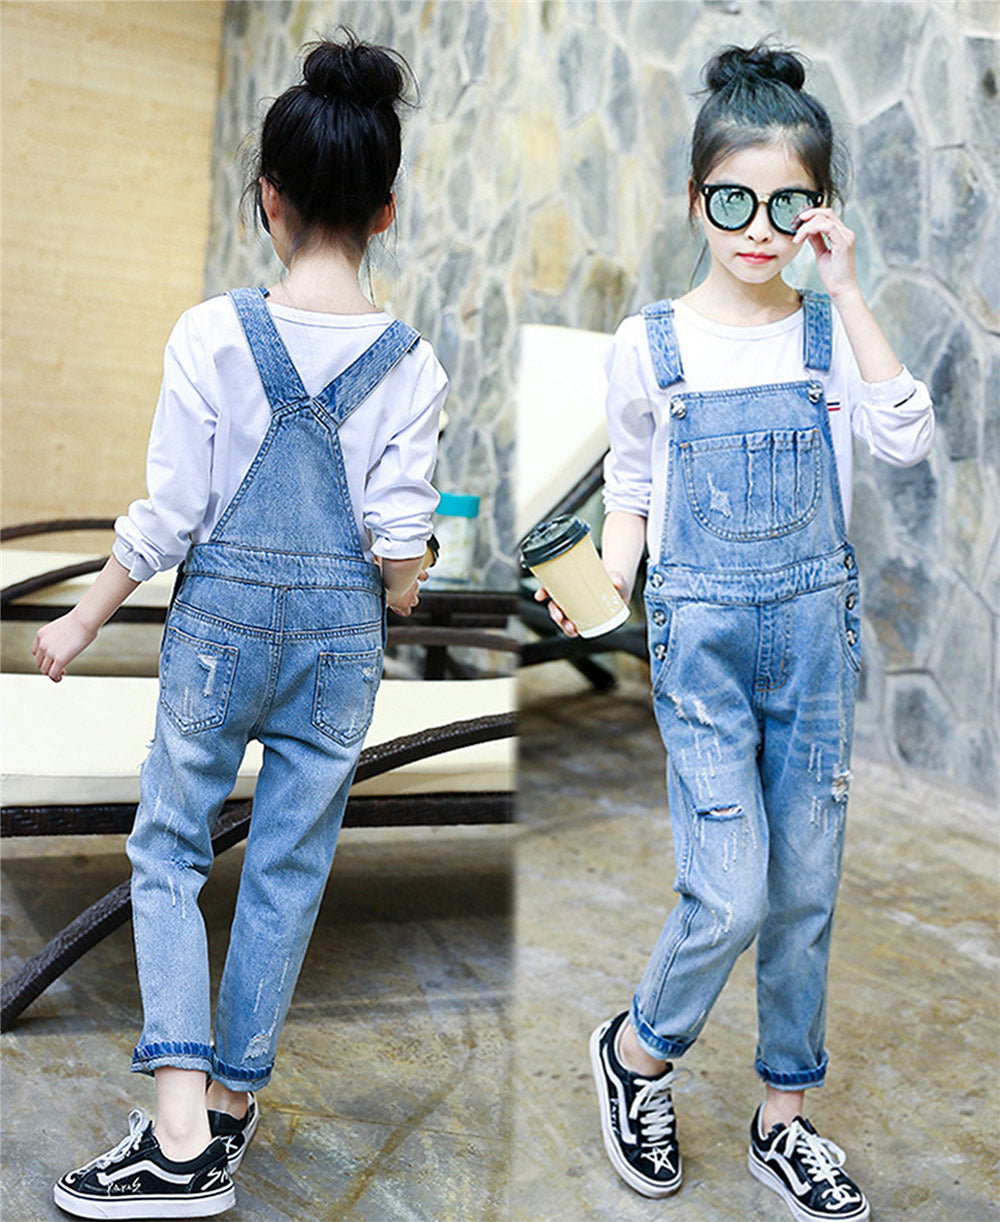 Girls Denim Ripped Overalls Washed Distressed Jeans Pants